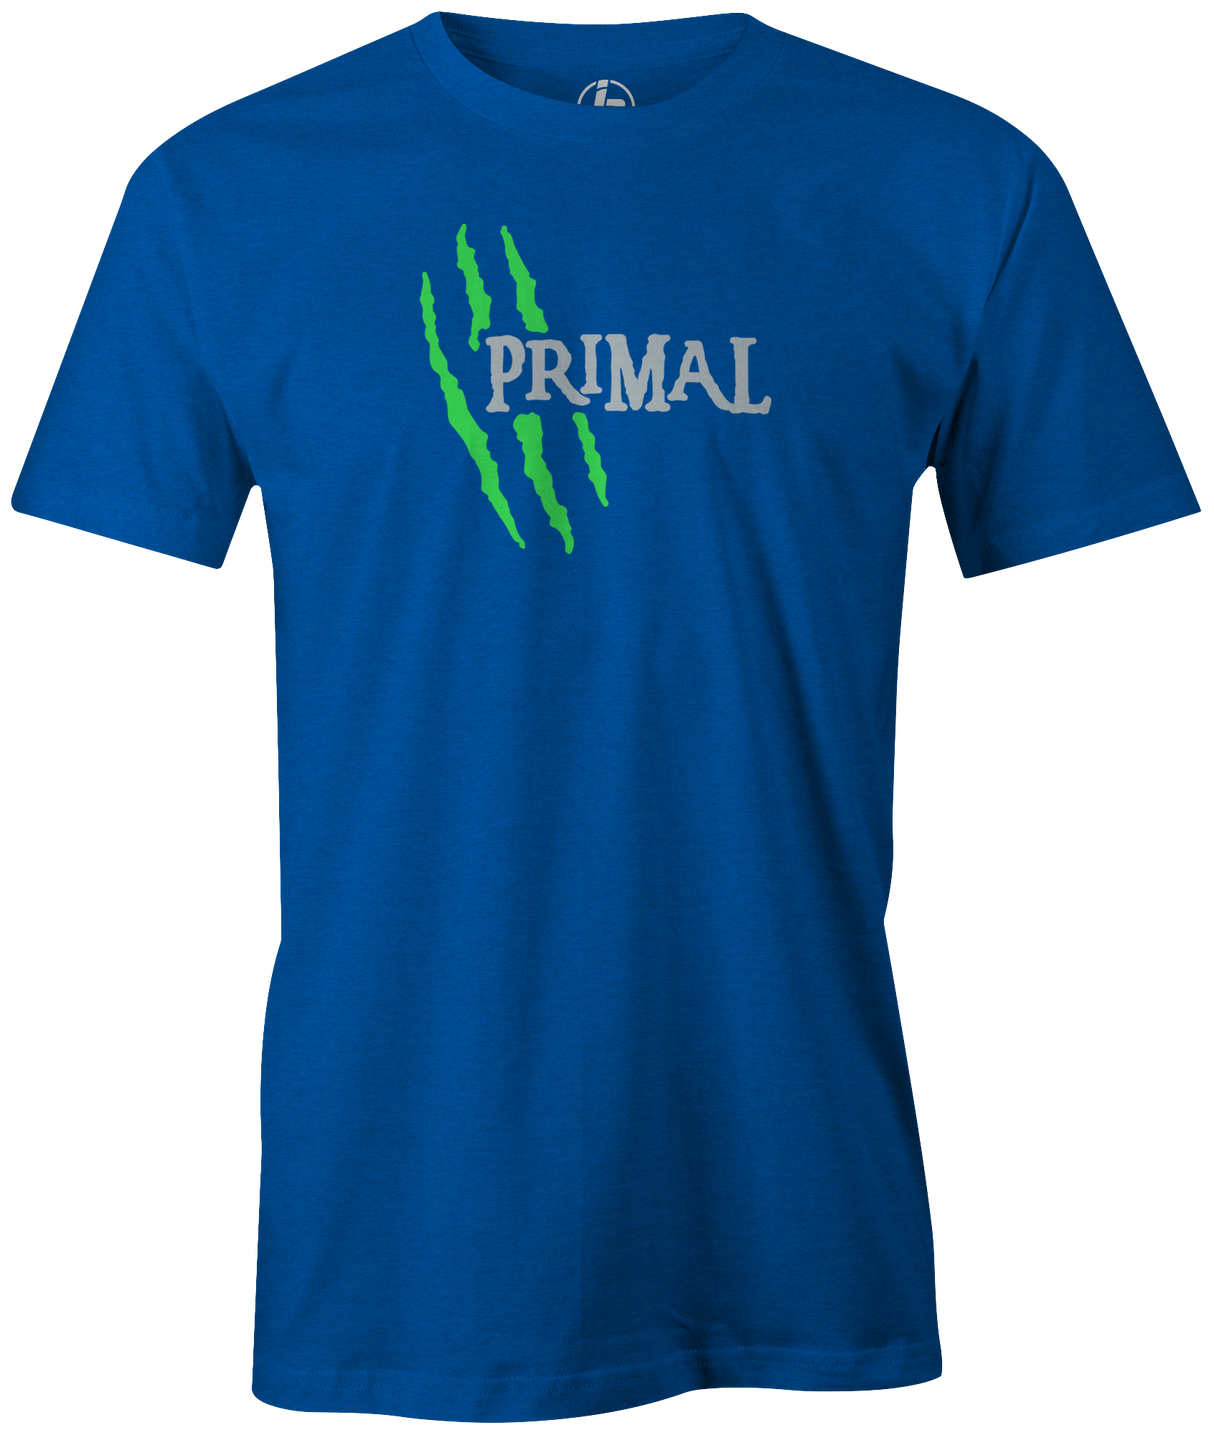 This Motiv Bowling shirt features the famous Primal logo found on some of the most popular Motiv bowling balls of all time. If you love Motiv, the Primal shirt is a must for your collection and a great practice shirt when you hit the lanes! AJ Johnson, Andrew Anderson